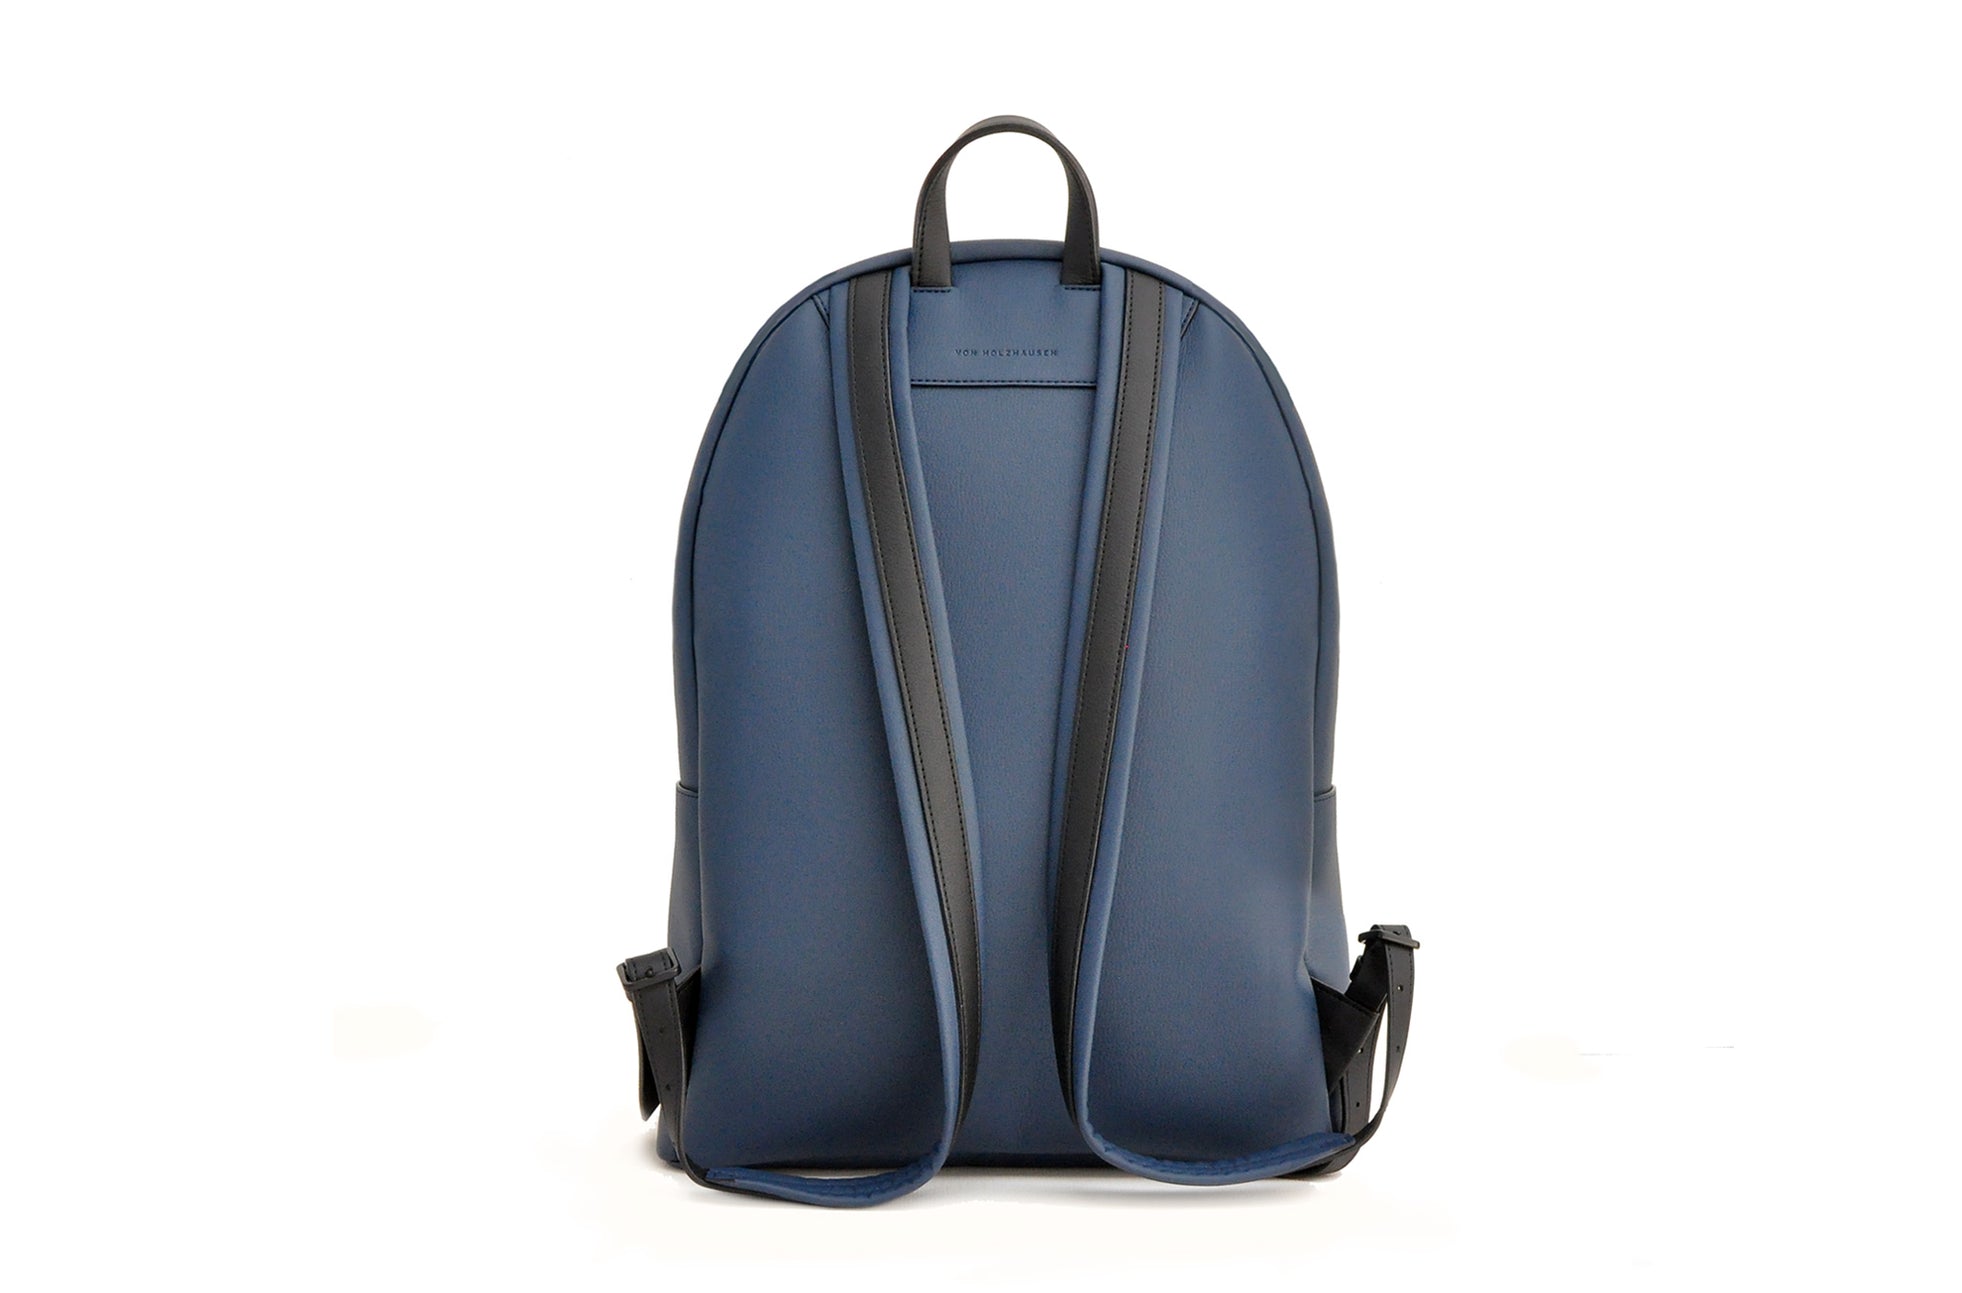 The Classic Backpack in Technik in Denim and Black image 